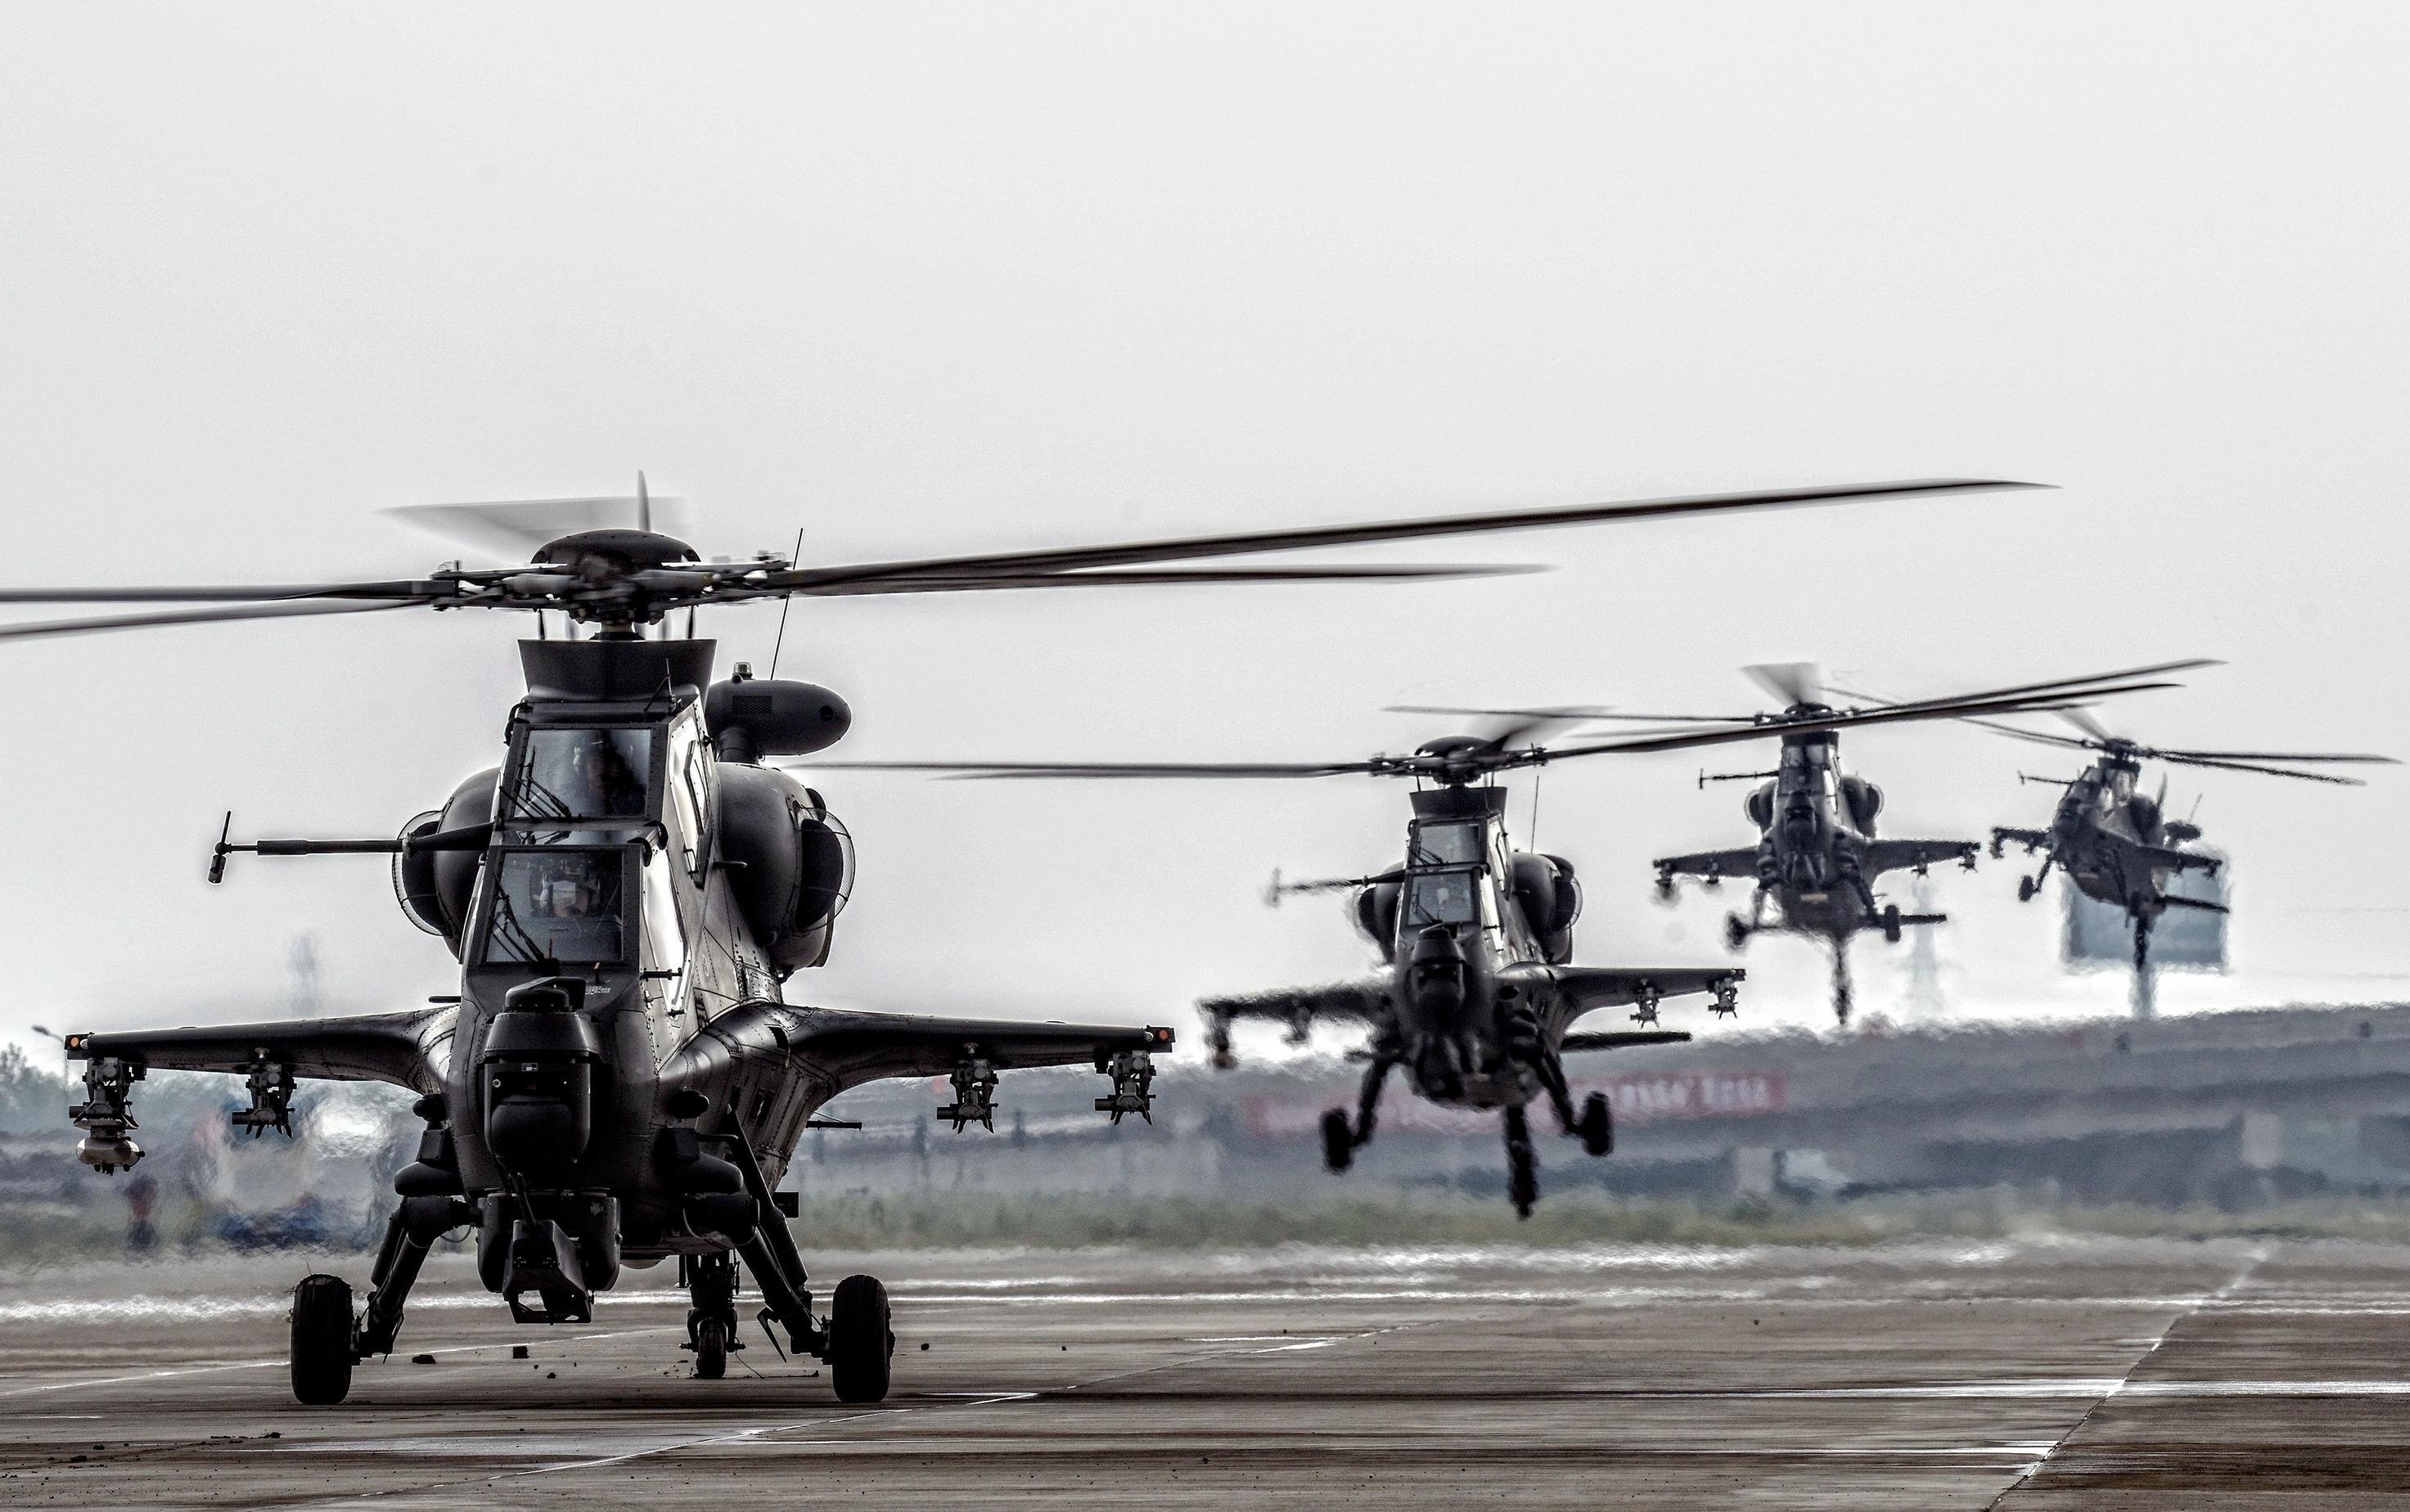 CAIC WZ-10, HD wallpapers, Attack helicopter, China Air Force, 2950x1850 HD Desktop